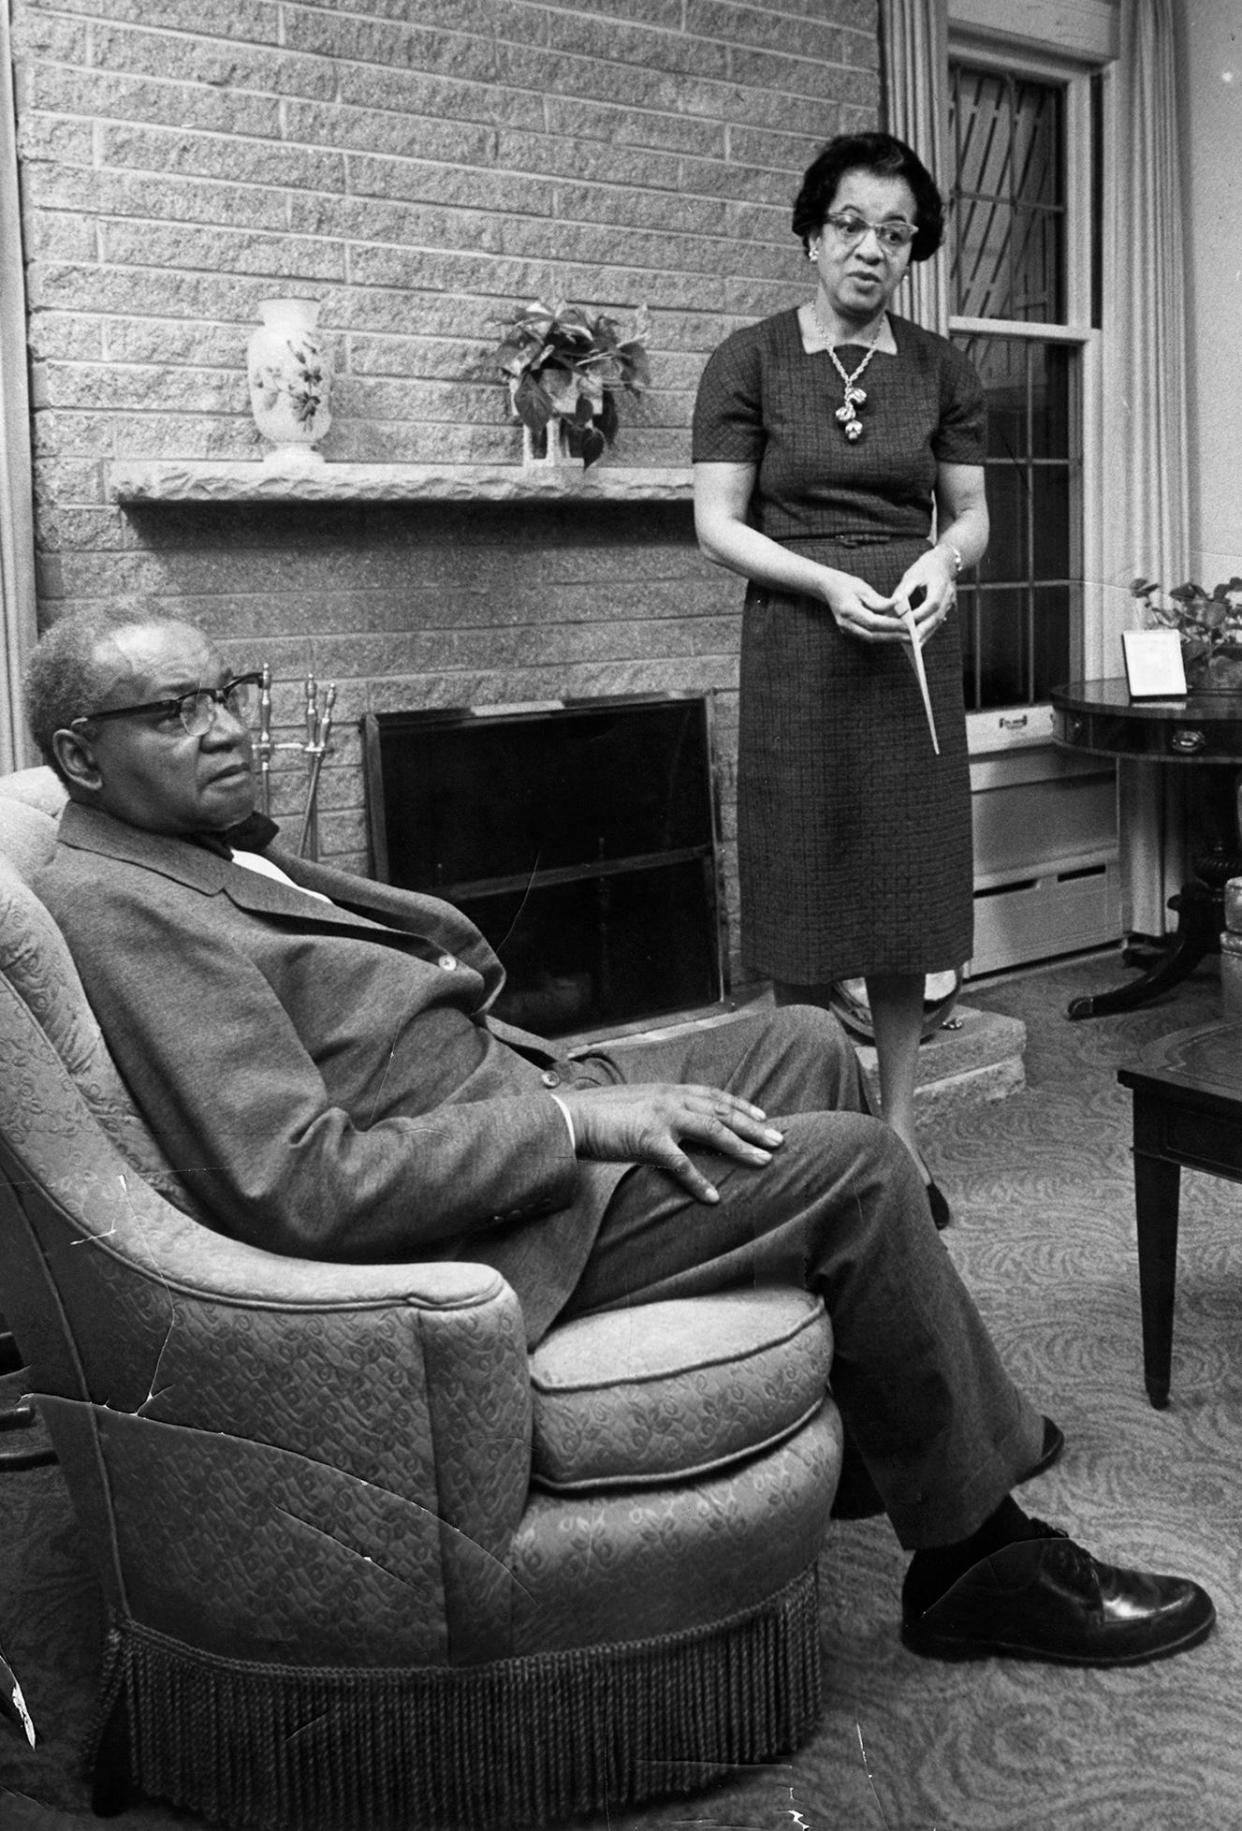 Wilbur and Ardie Halyard, both former NAACP presidents, are pictured in their home on Dec. 10, 1962. The couple was known for founding Columbia Savings & Loan Association, the city's first Black-owned bank and one of few from 1924 to 1976 to offer home loans to Black Milwaukeeans. The Halyard Park neighborhood is named for them.